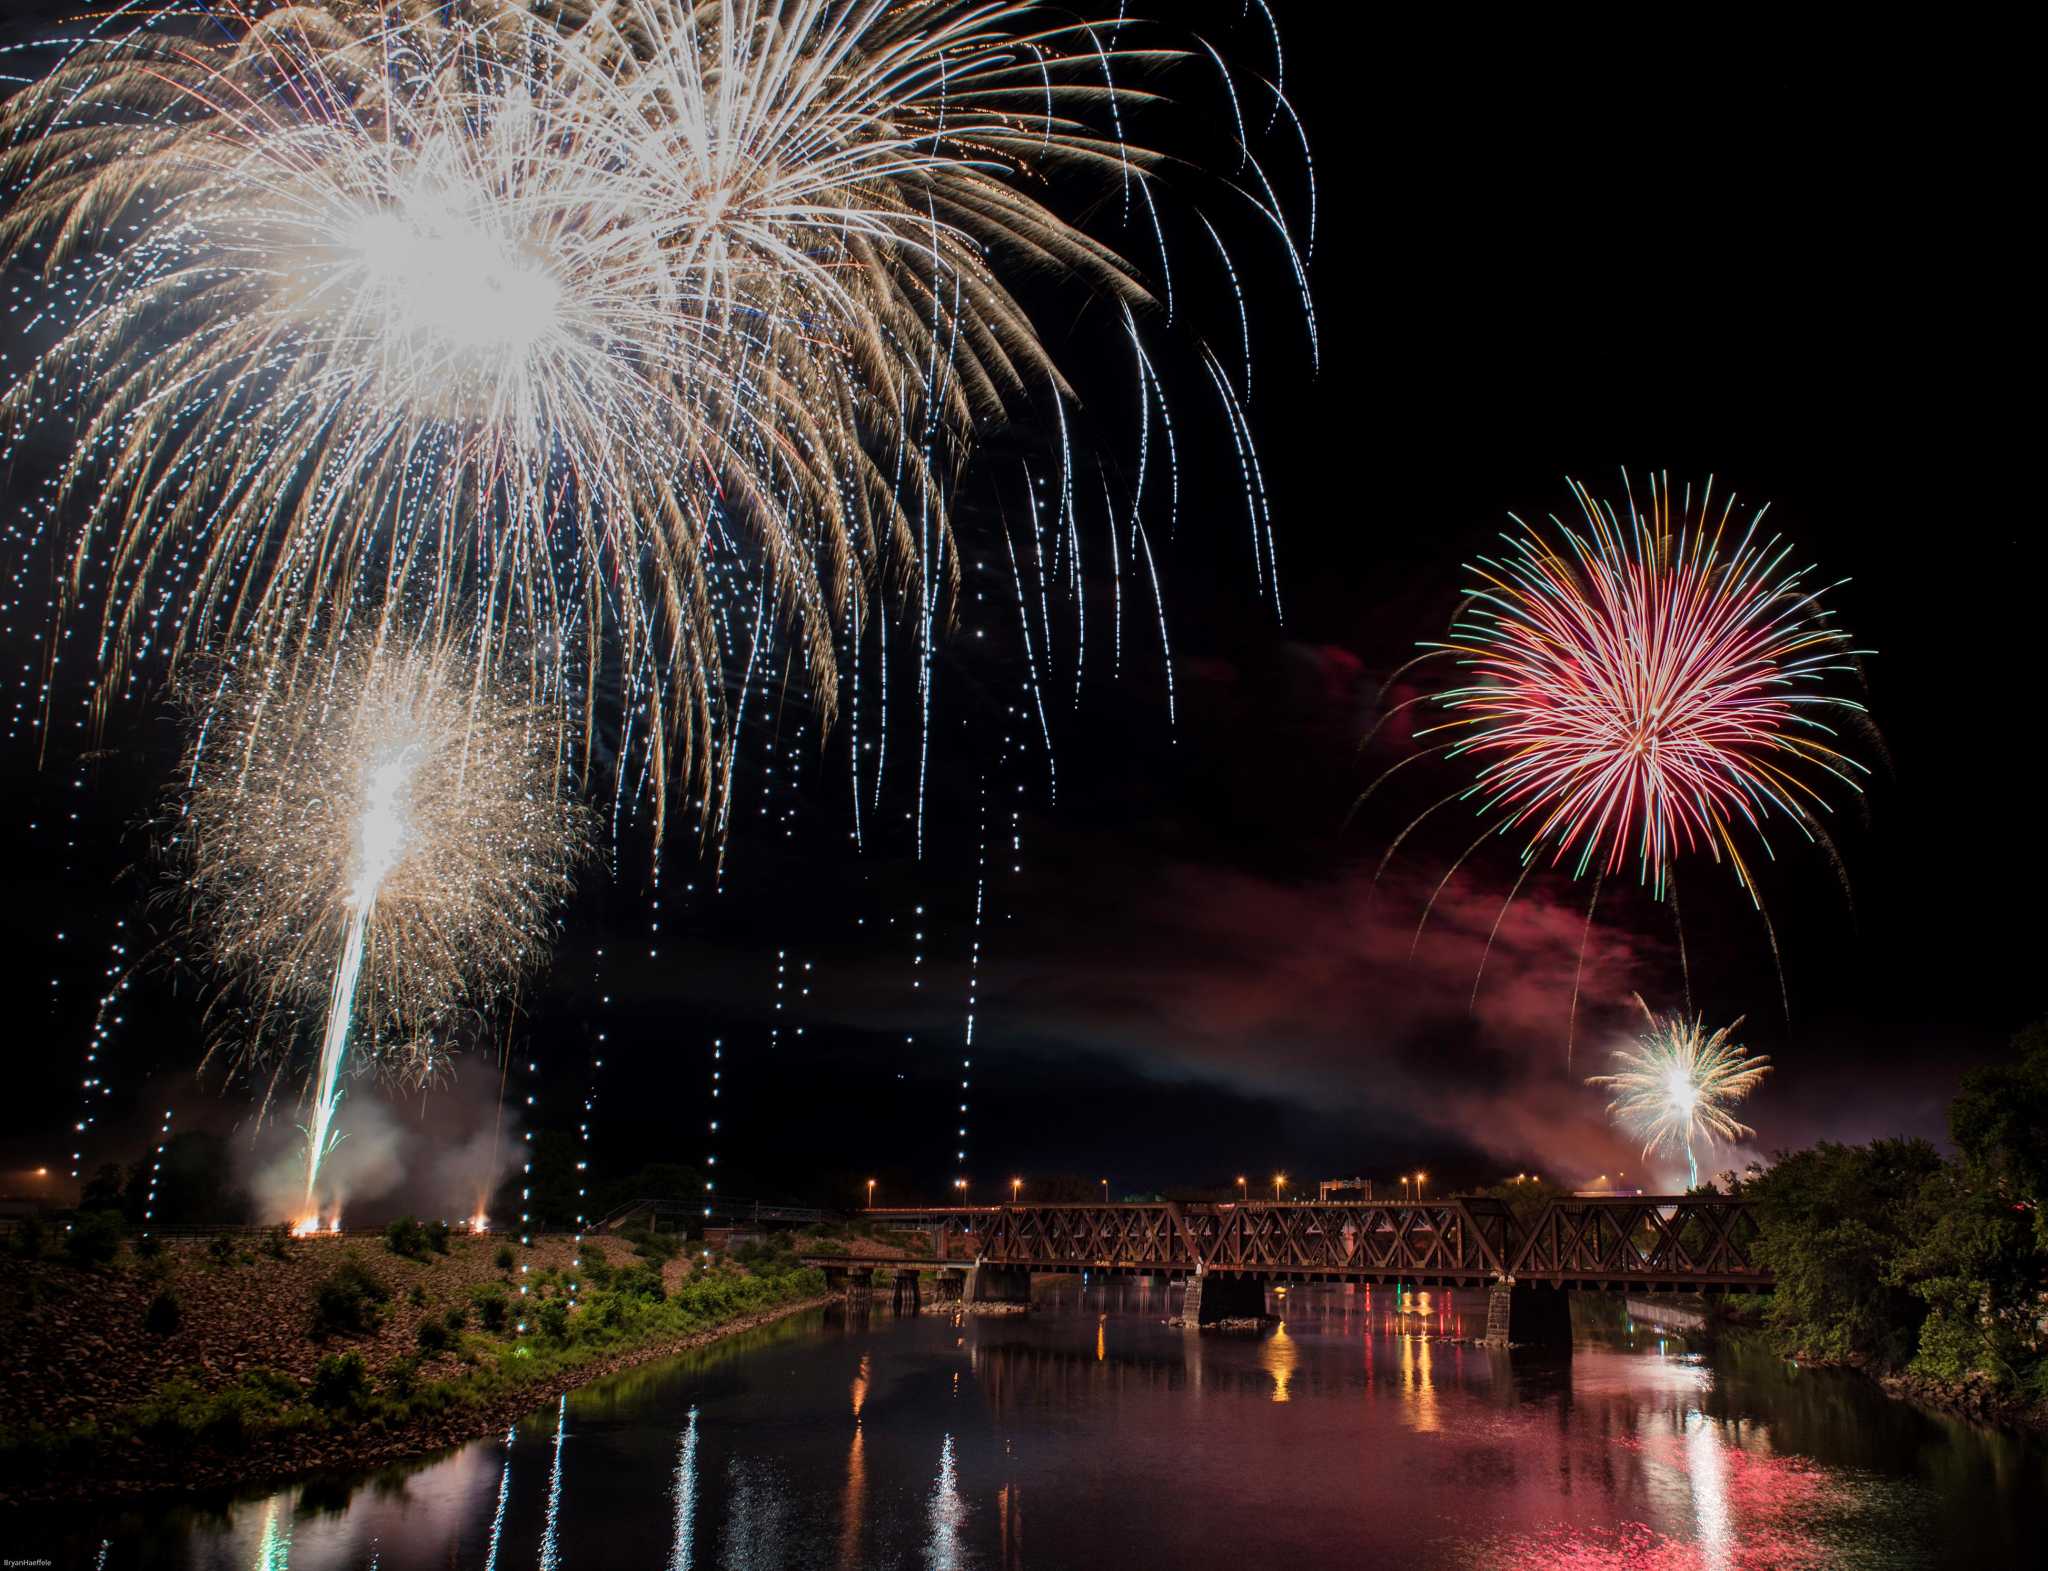 DerbyShelton fireworks celebration to be held without Derby this year